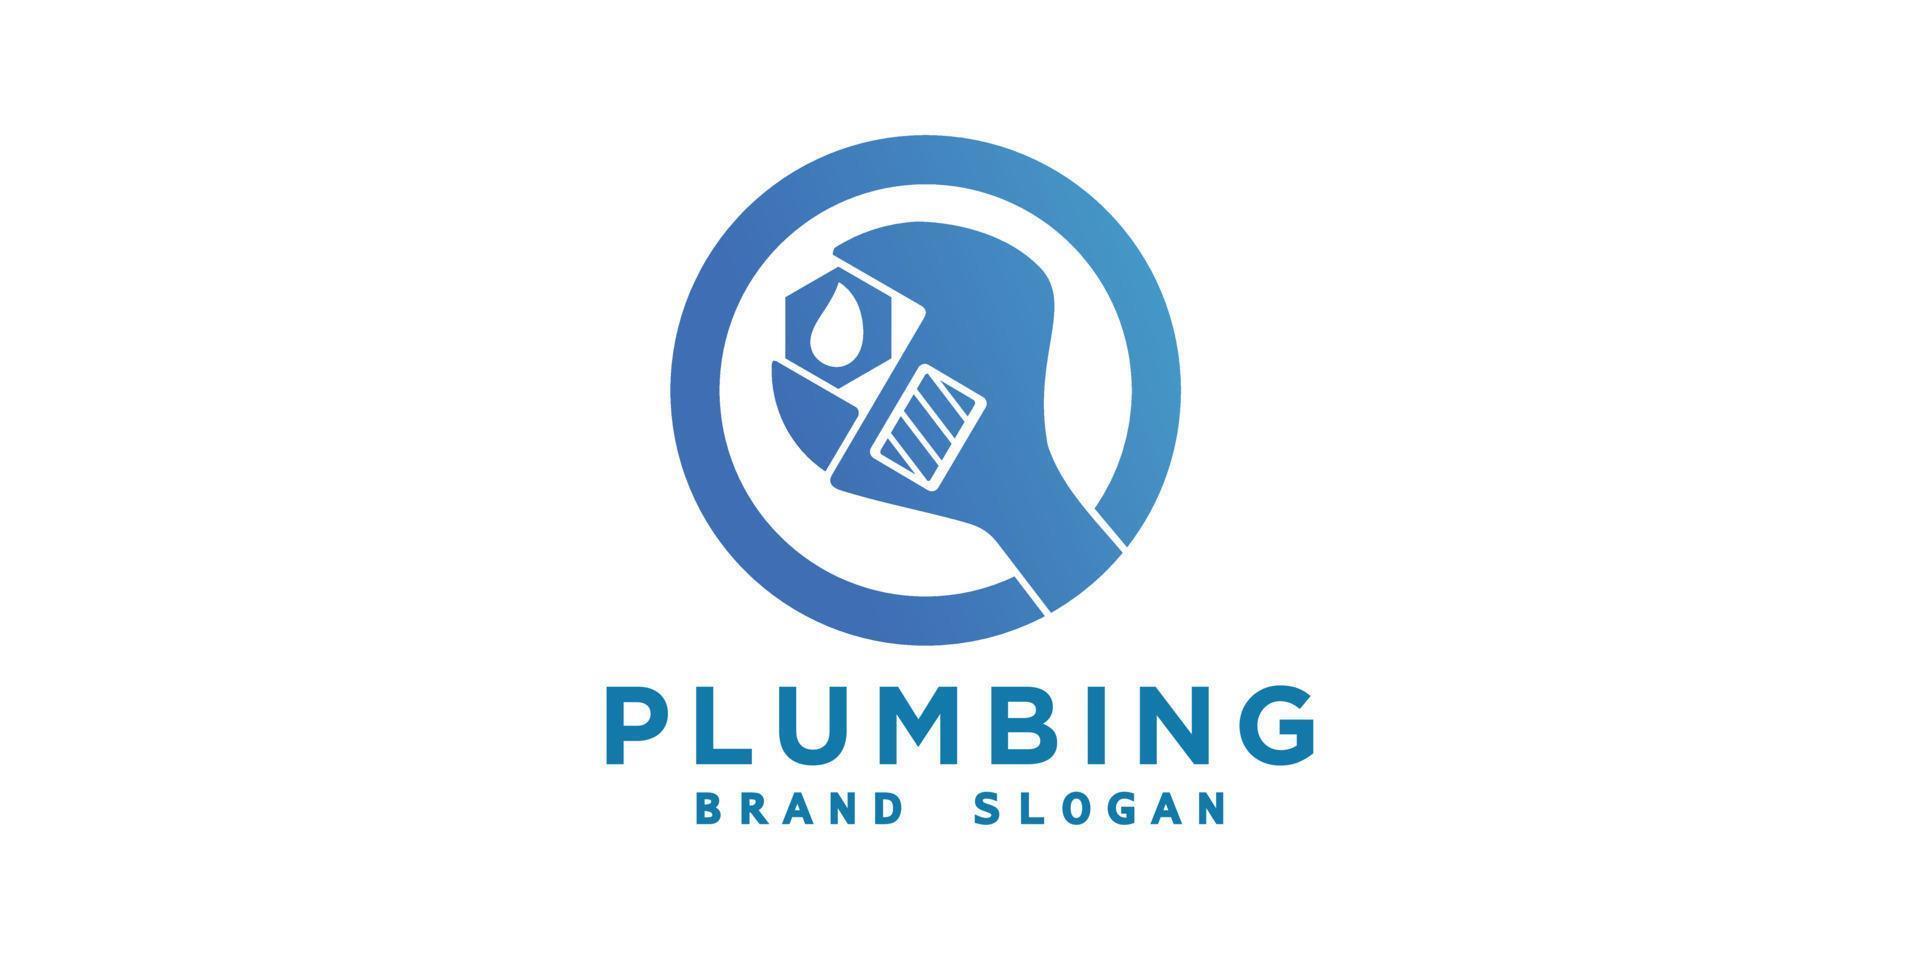 Wrench Plumbing logo with modern style premium vector